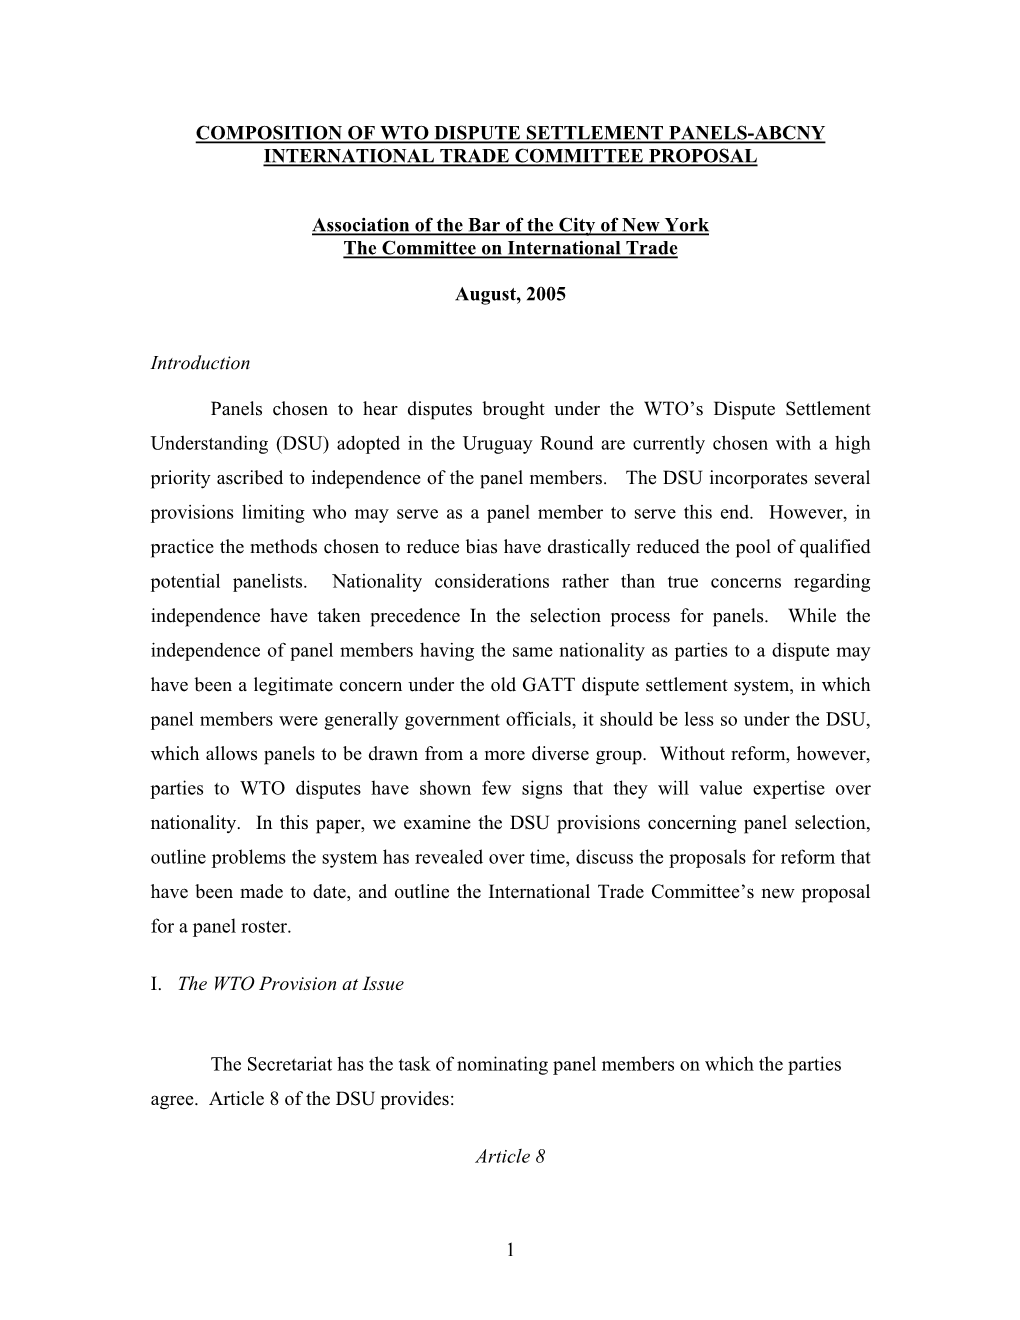 Composition of Wto Dispute Settlement Panels-Abcny International Trade Committee Proposal